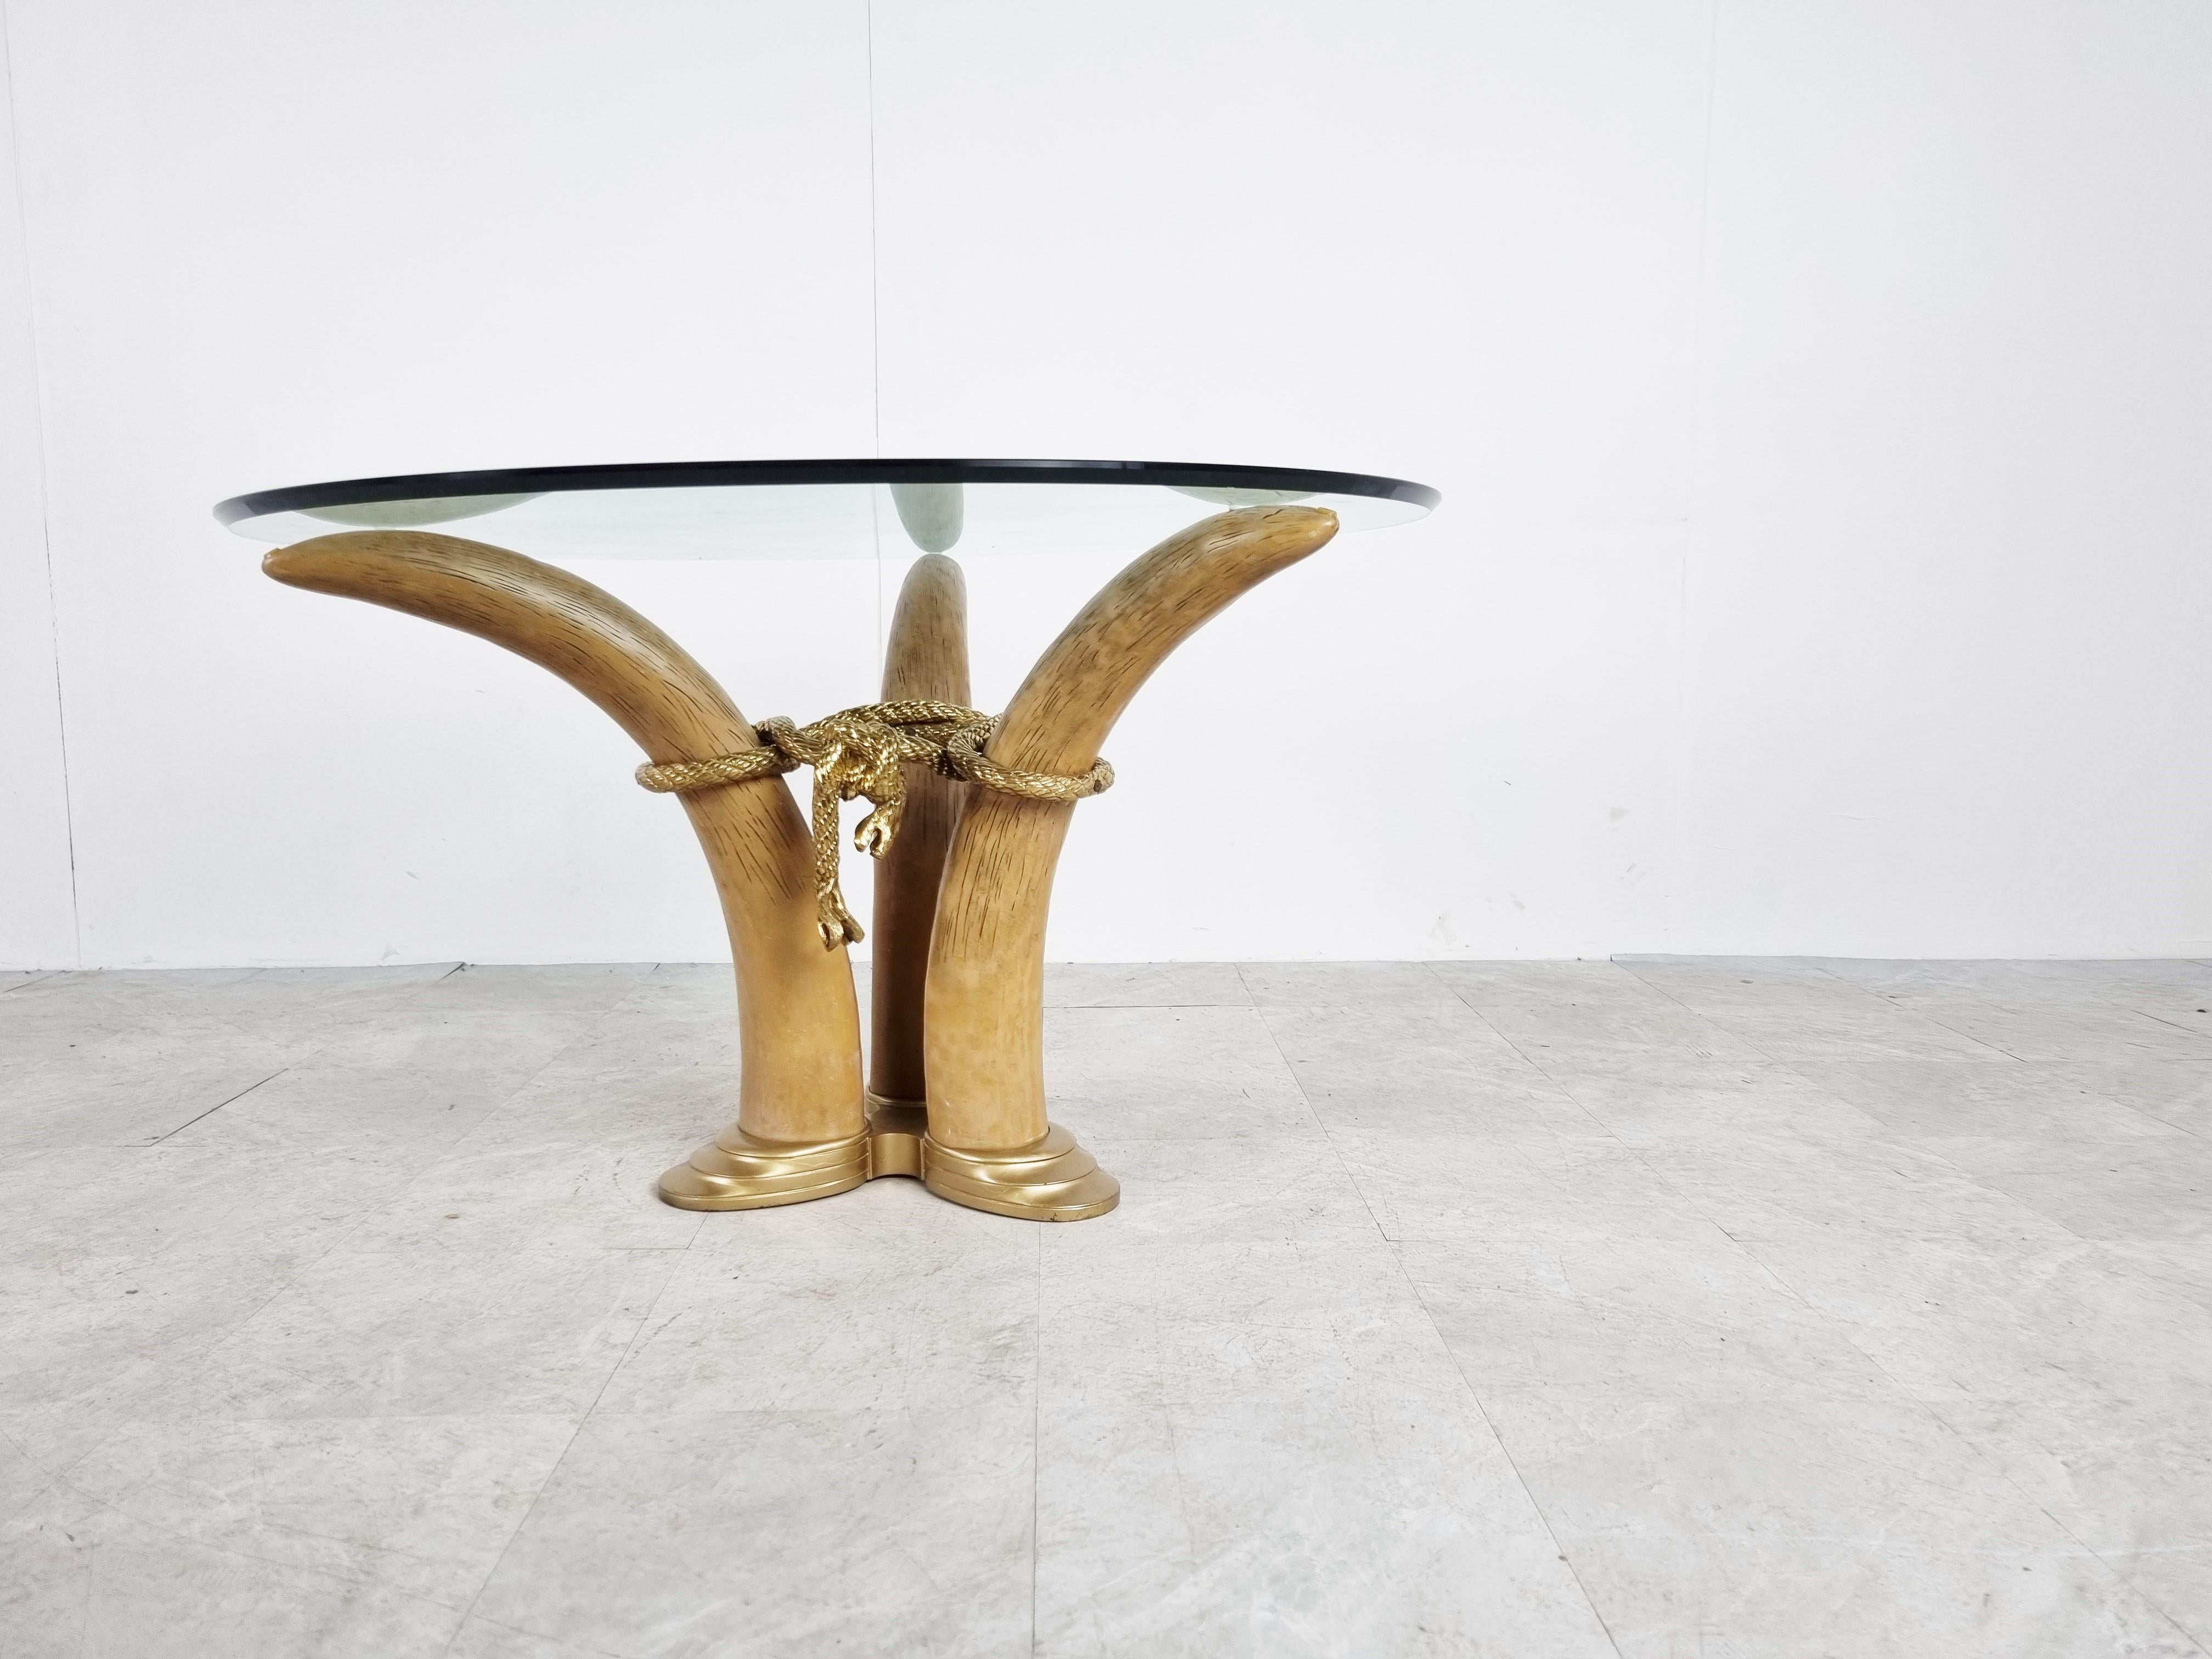 Elegant center table featuring faux elephant tusks made from resin mounted on a metal base with a round beveled glass top.

Real eye catching piece.

The standard height might be a bit low for a dining table, it can also be used as a coffee